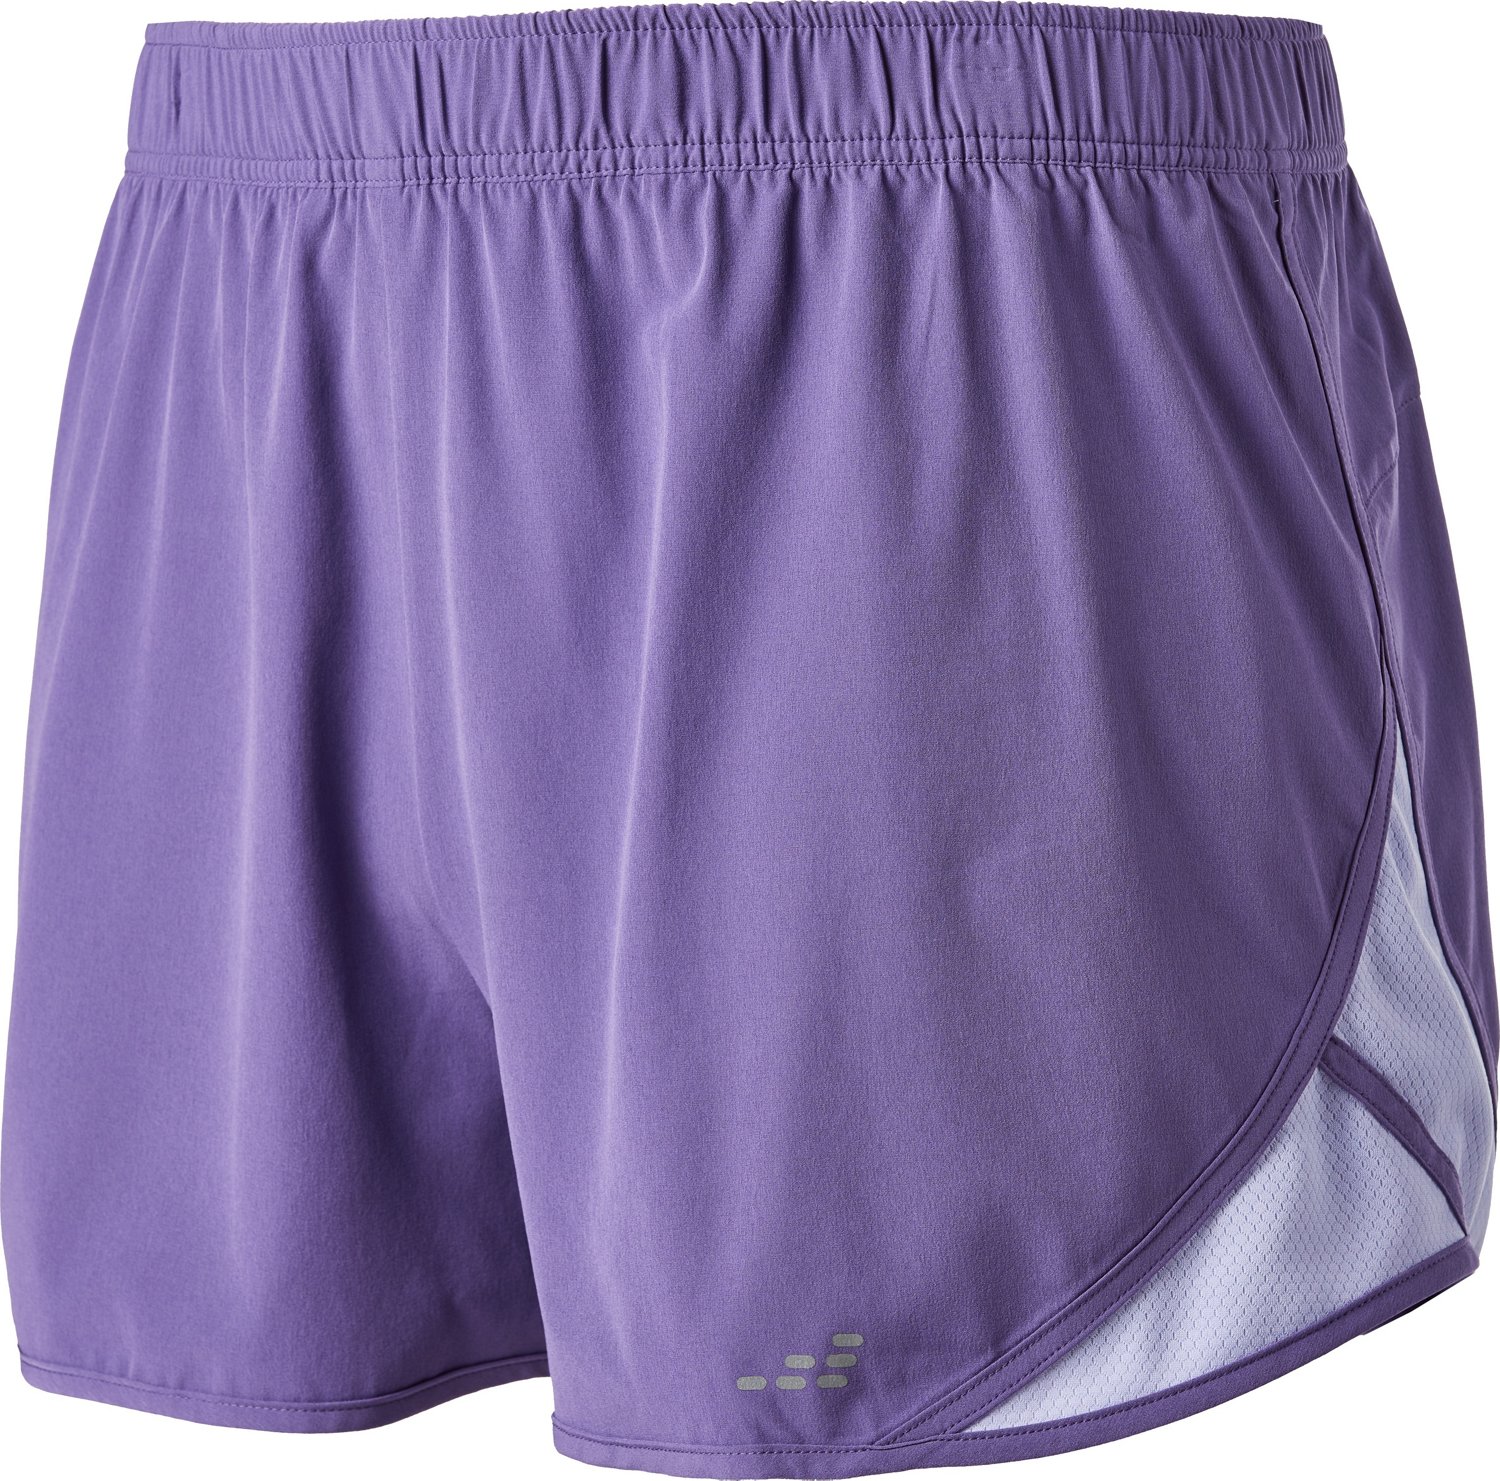 BCG Women's Mesh Angle Plus Training Shorts 5-in | Academy